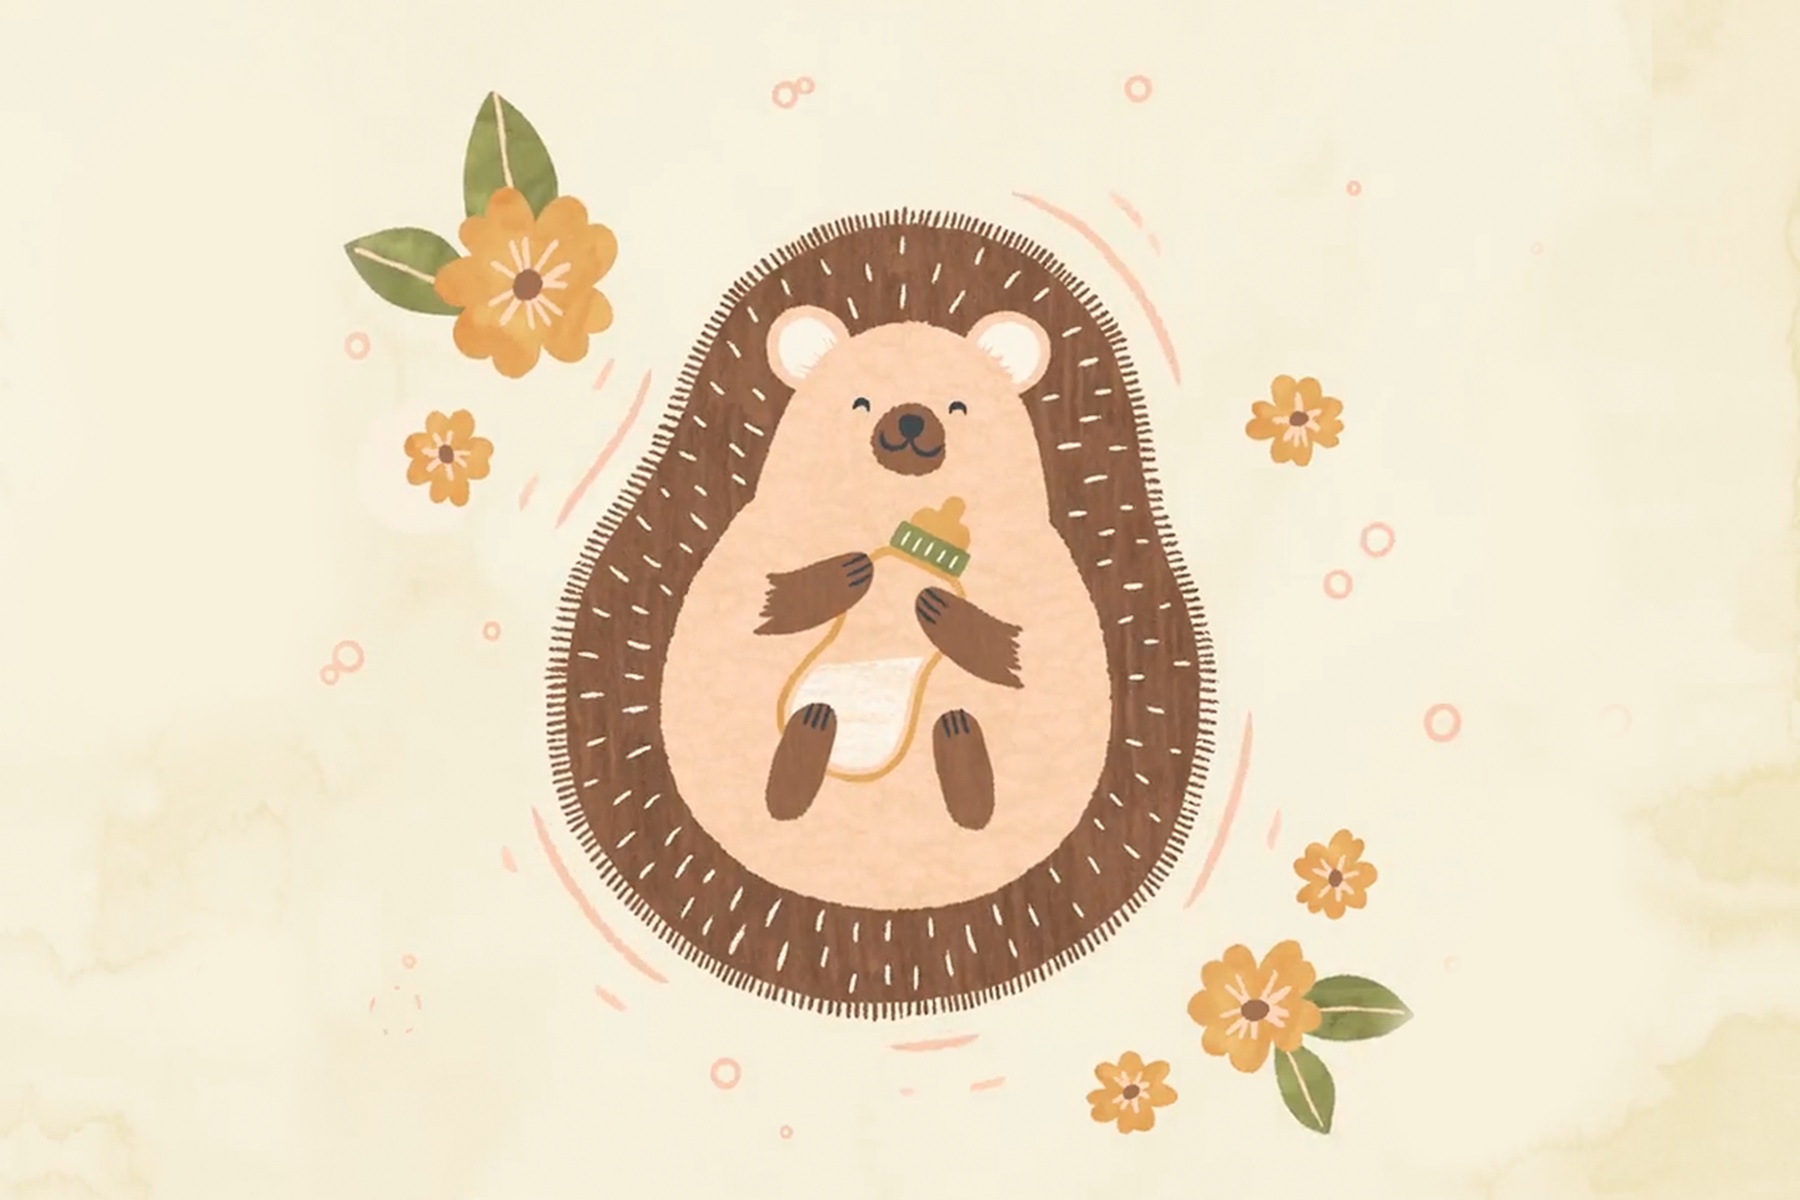 Card artwork of a baby hedgehog on a yellow, flowery background.